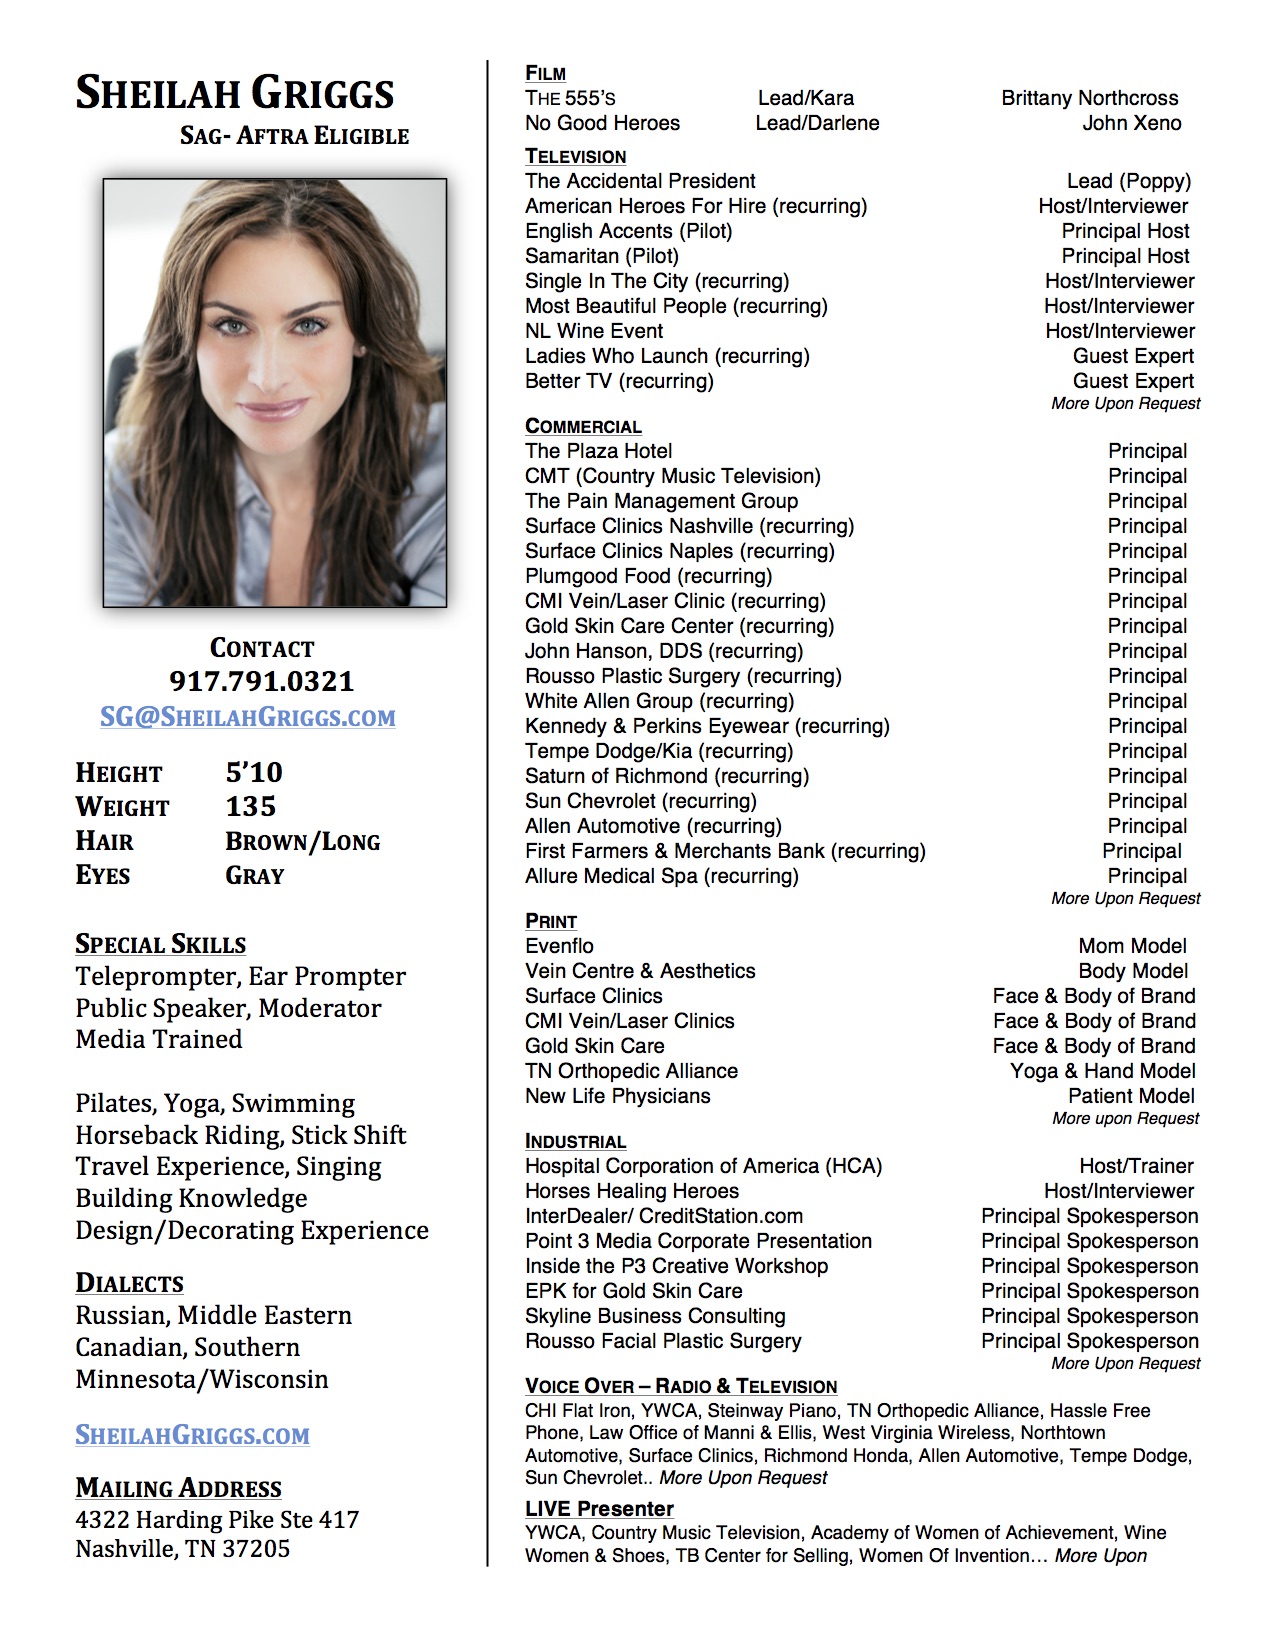 SG 2015 Talent Resume For Web